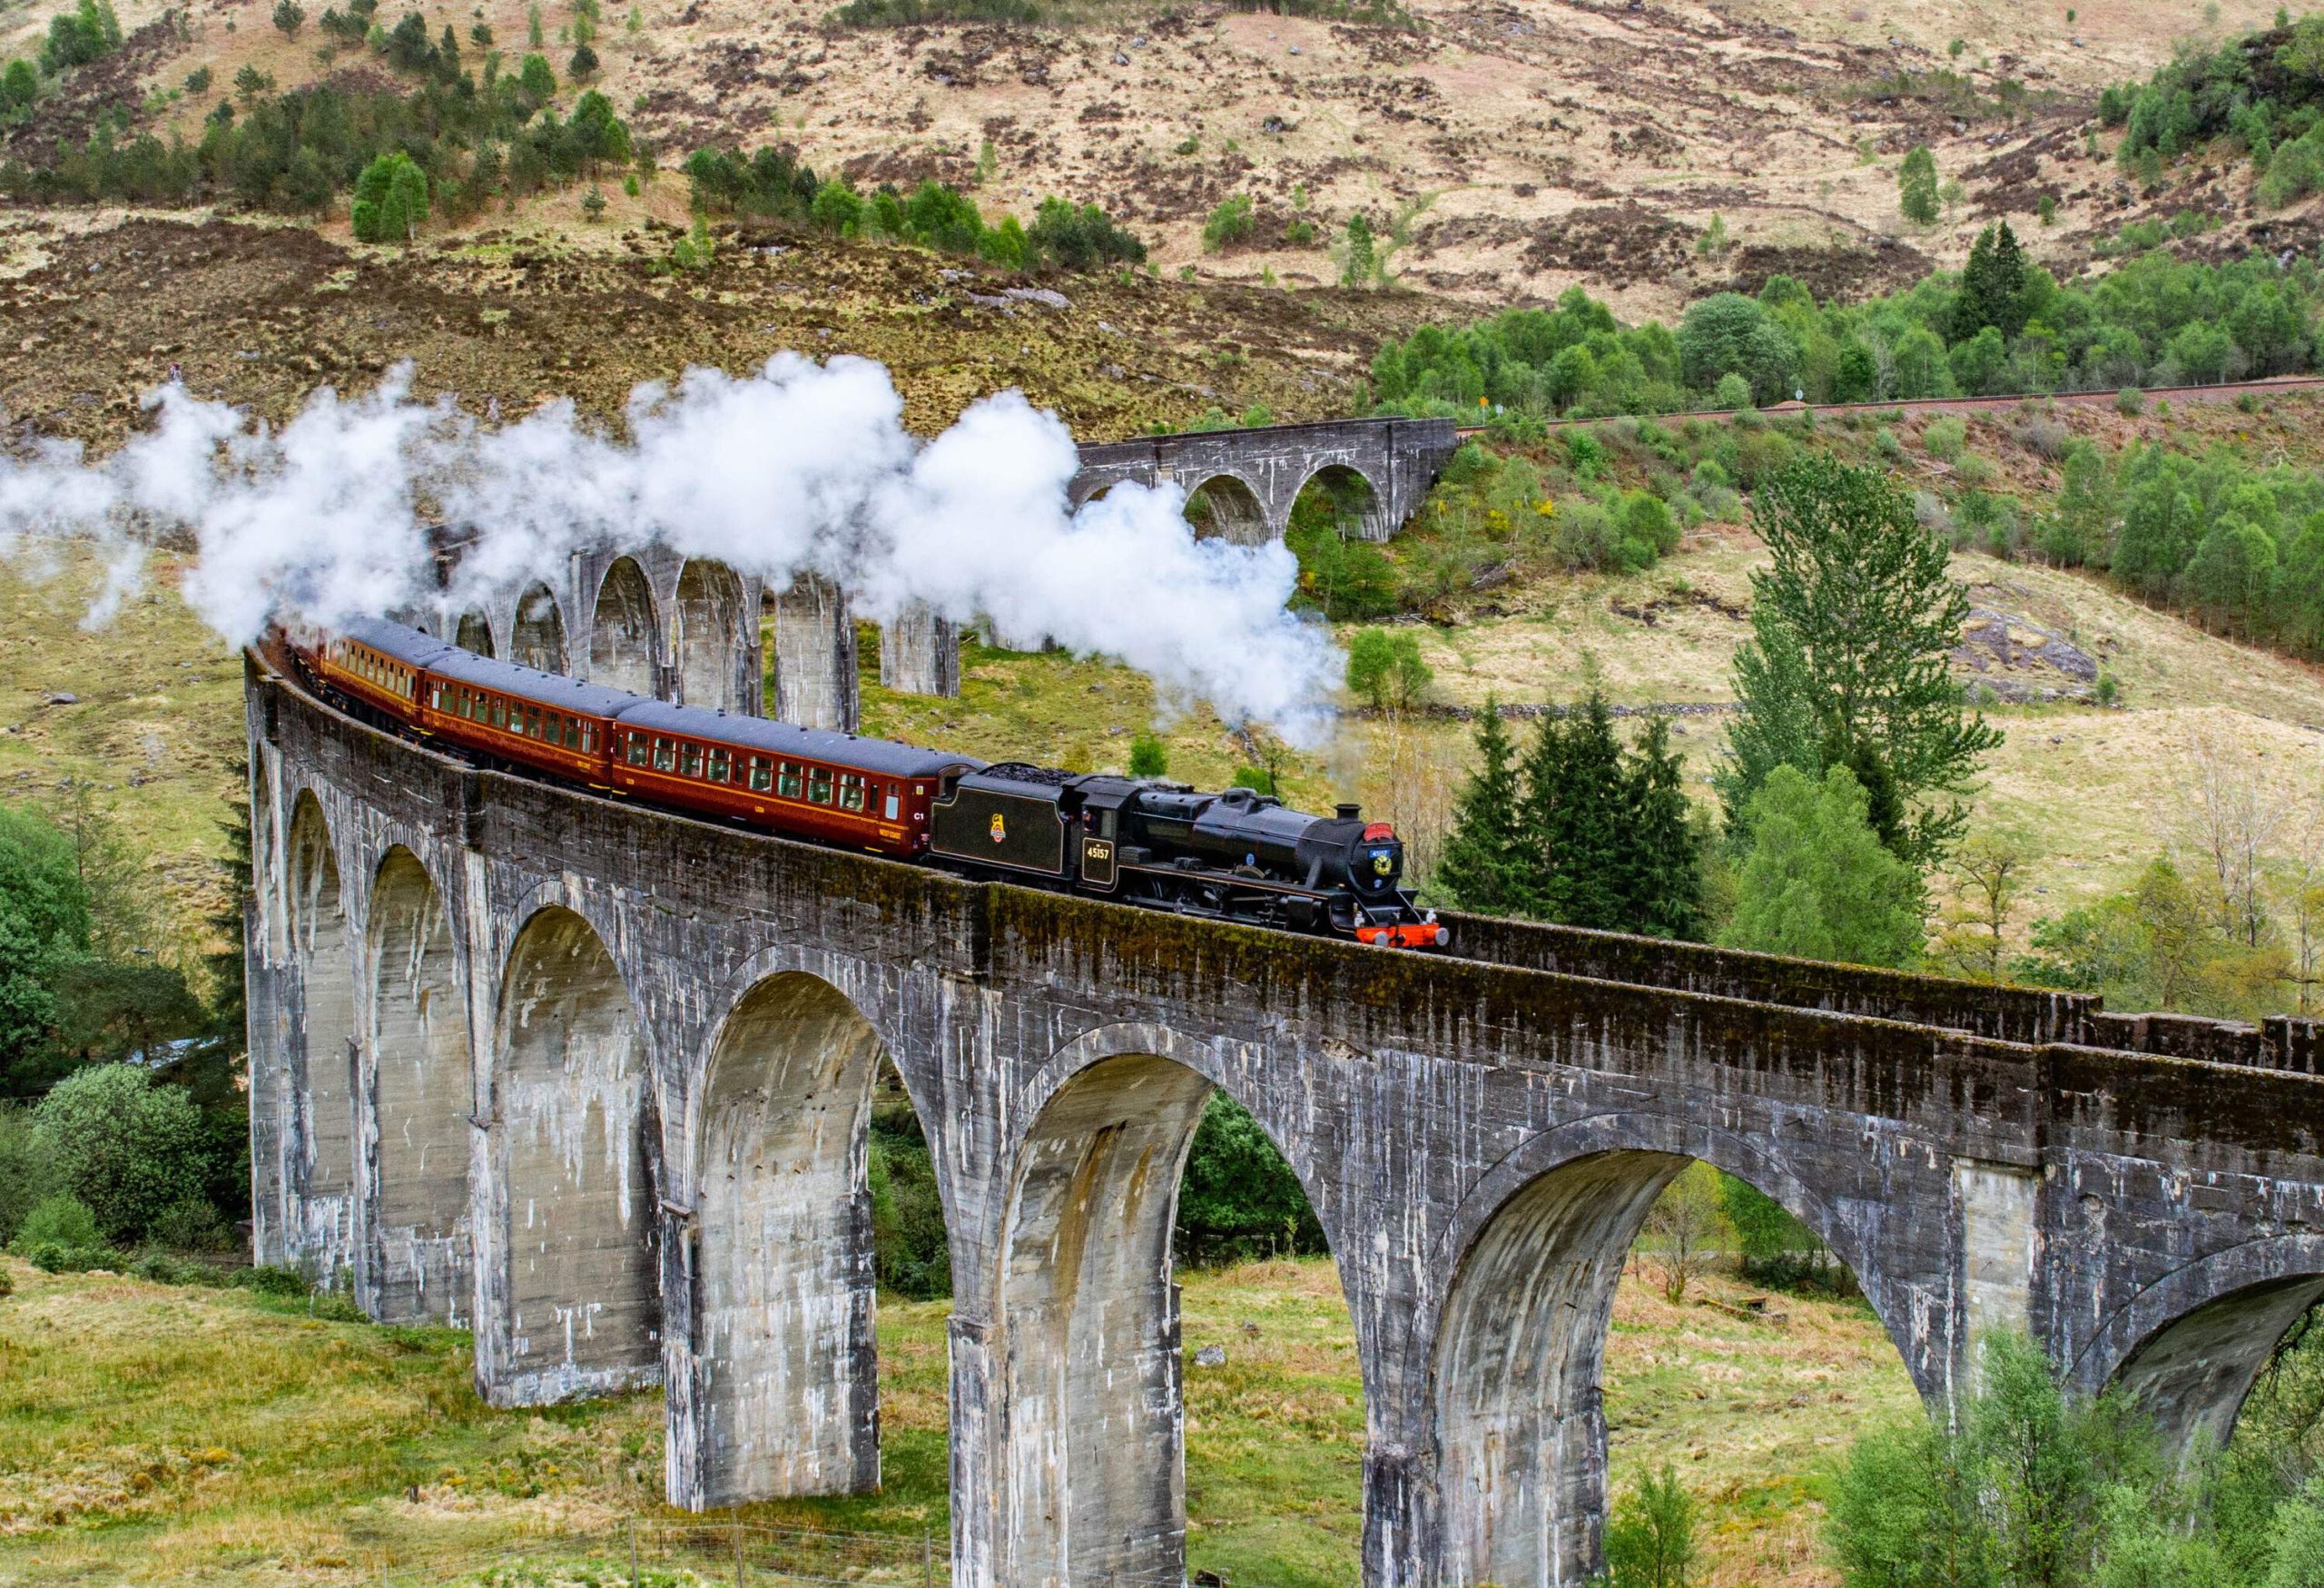 A steam train travelling on a long archway bridge in the mountains.